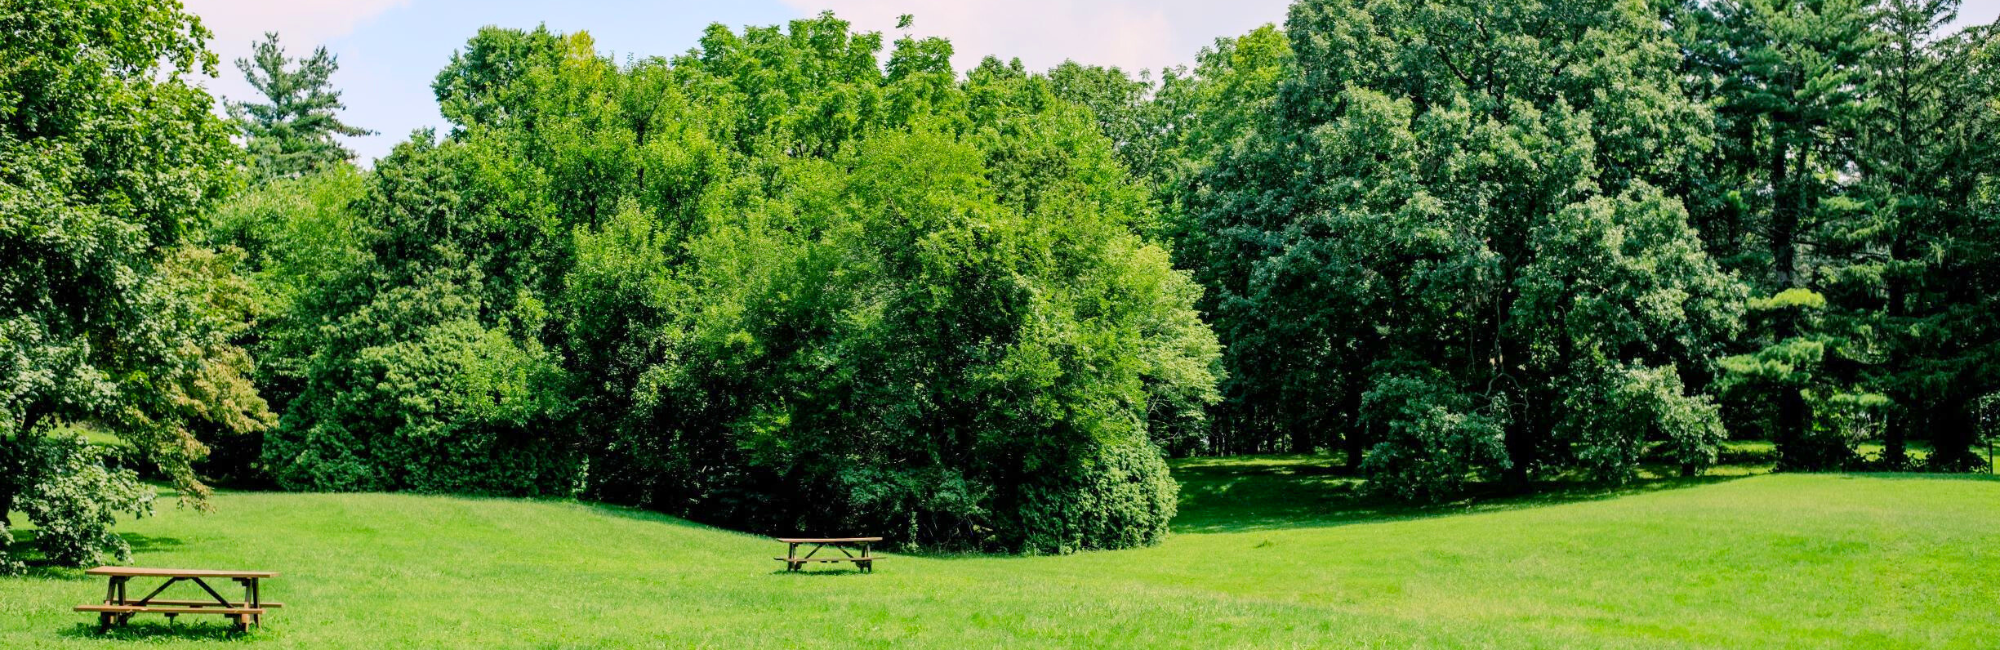 park with open green space, a picnic table, and a tree line in the distance